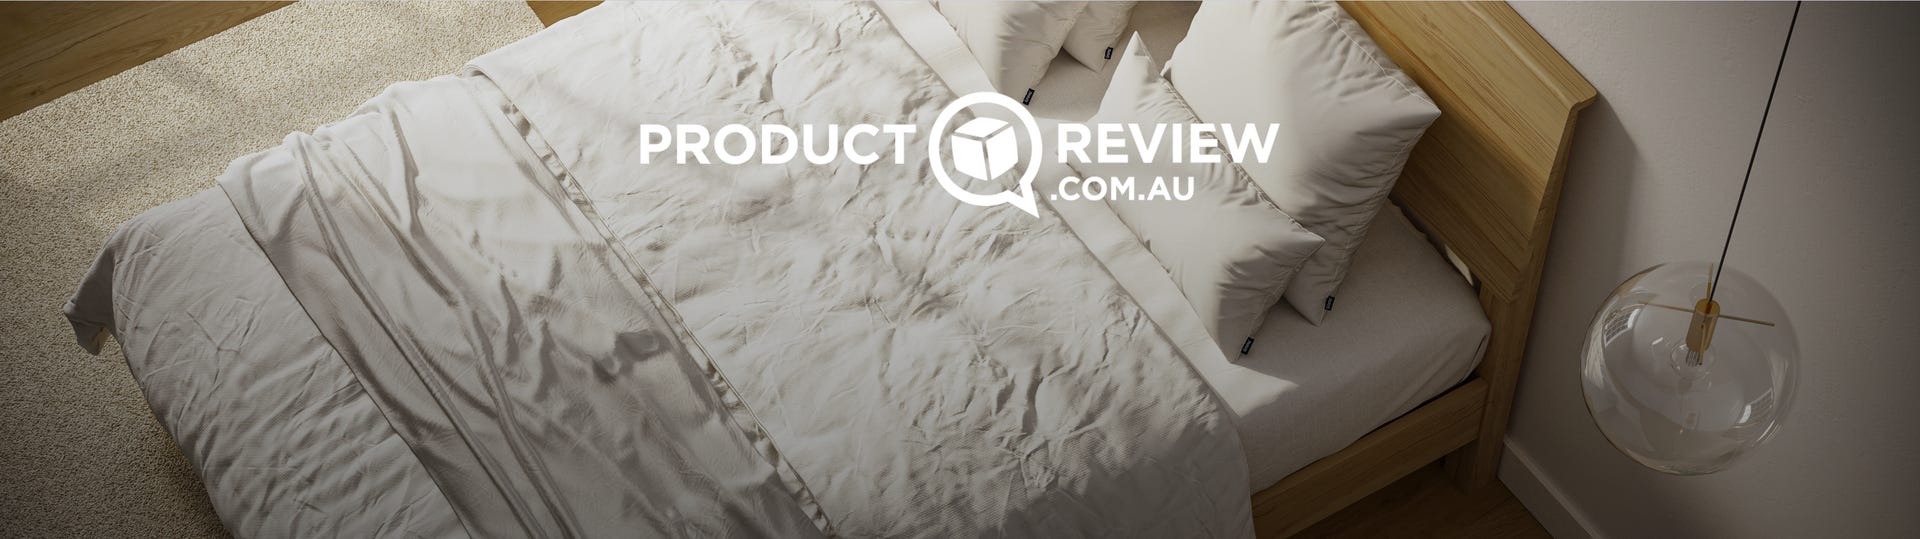 ProductReview_WoodenBed_1280×750.png